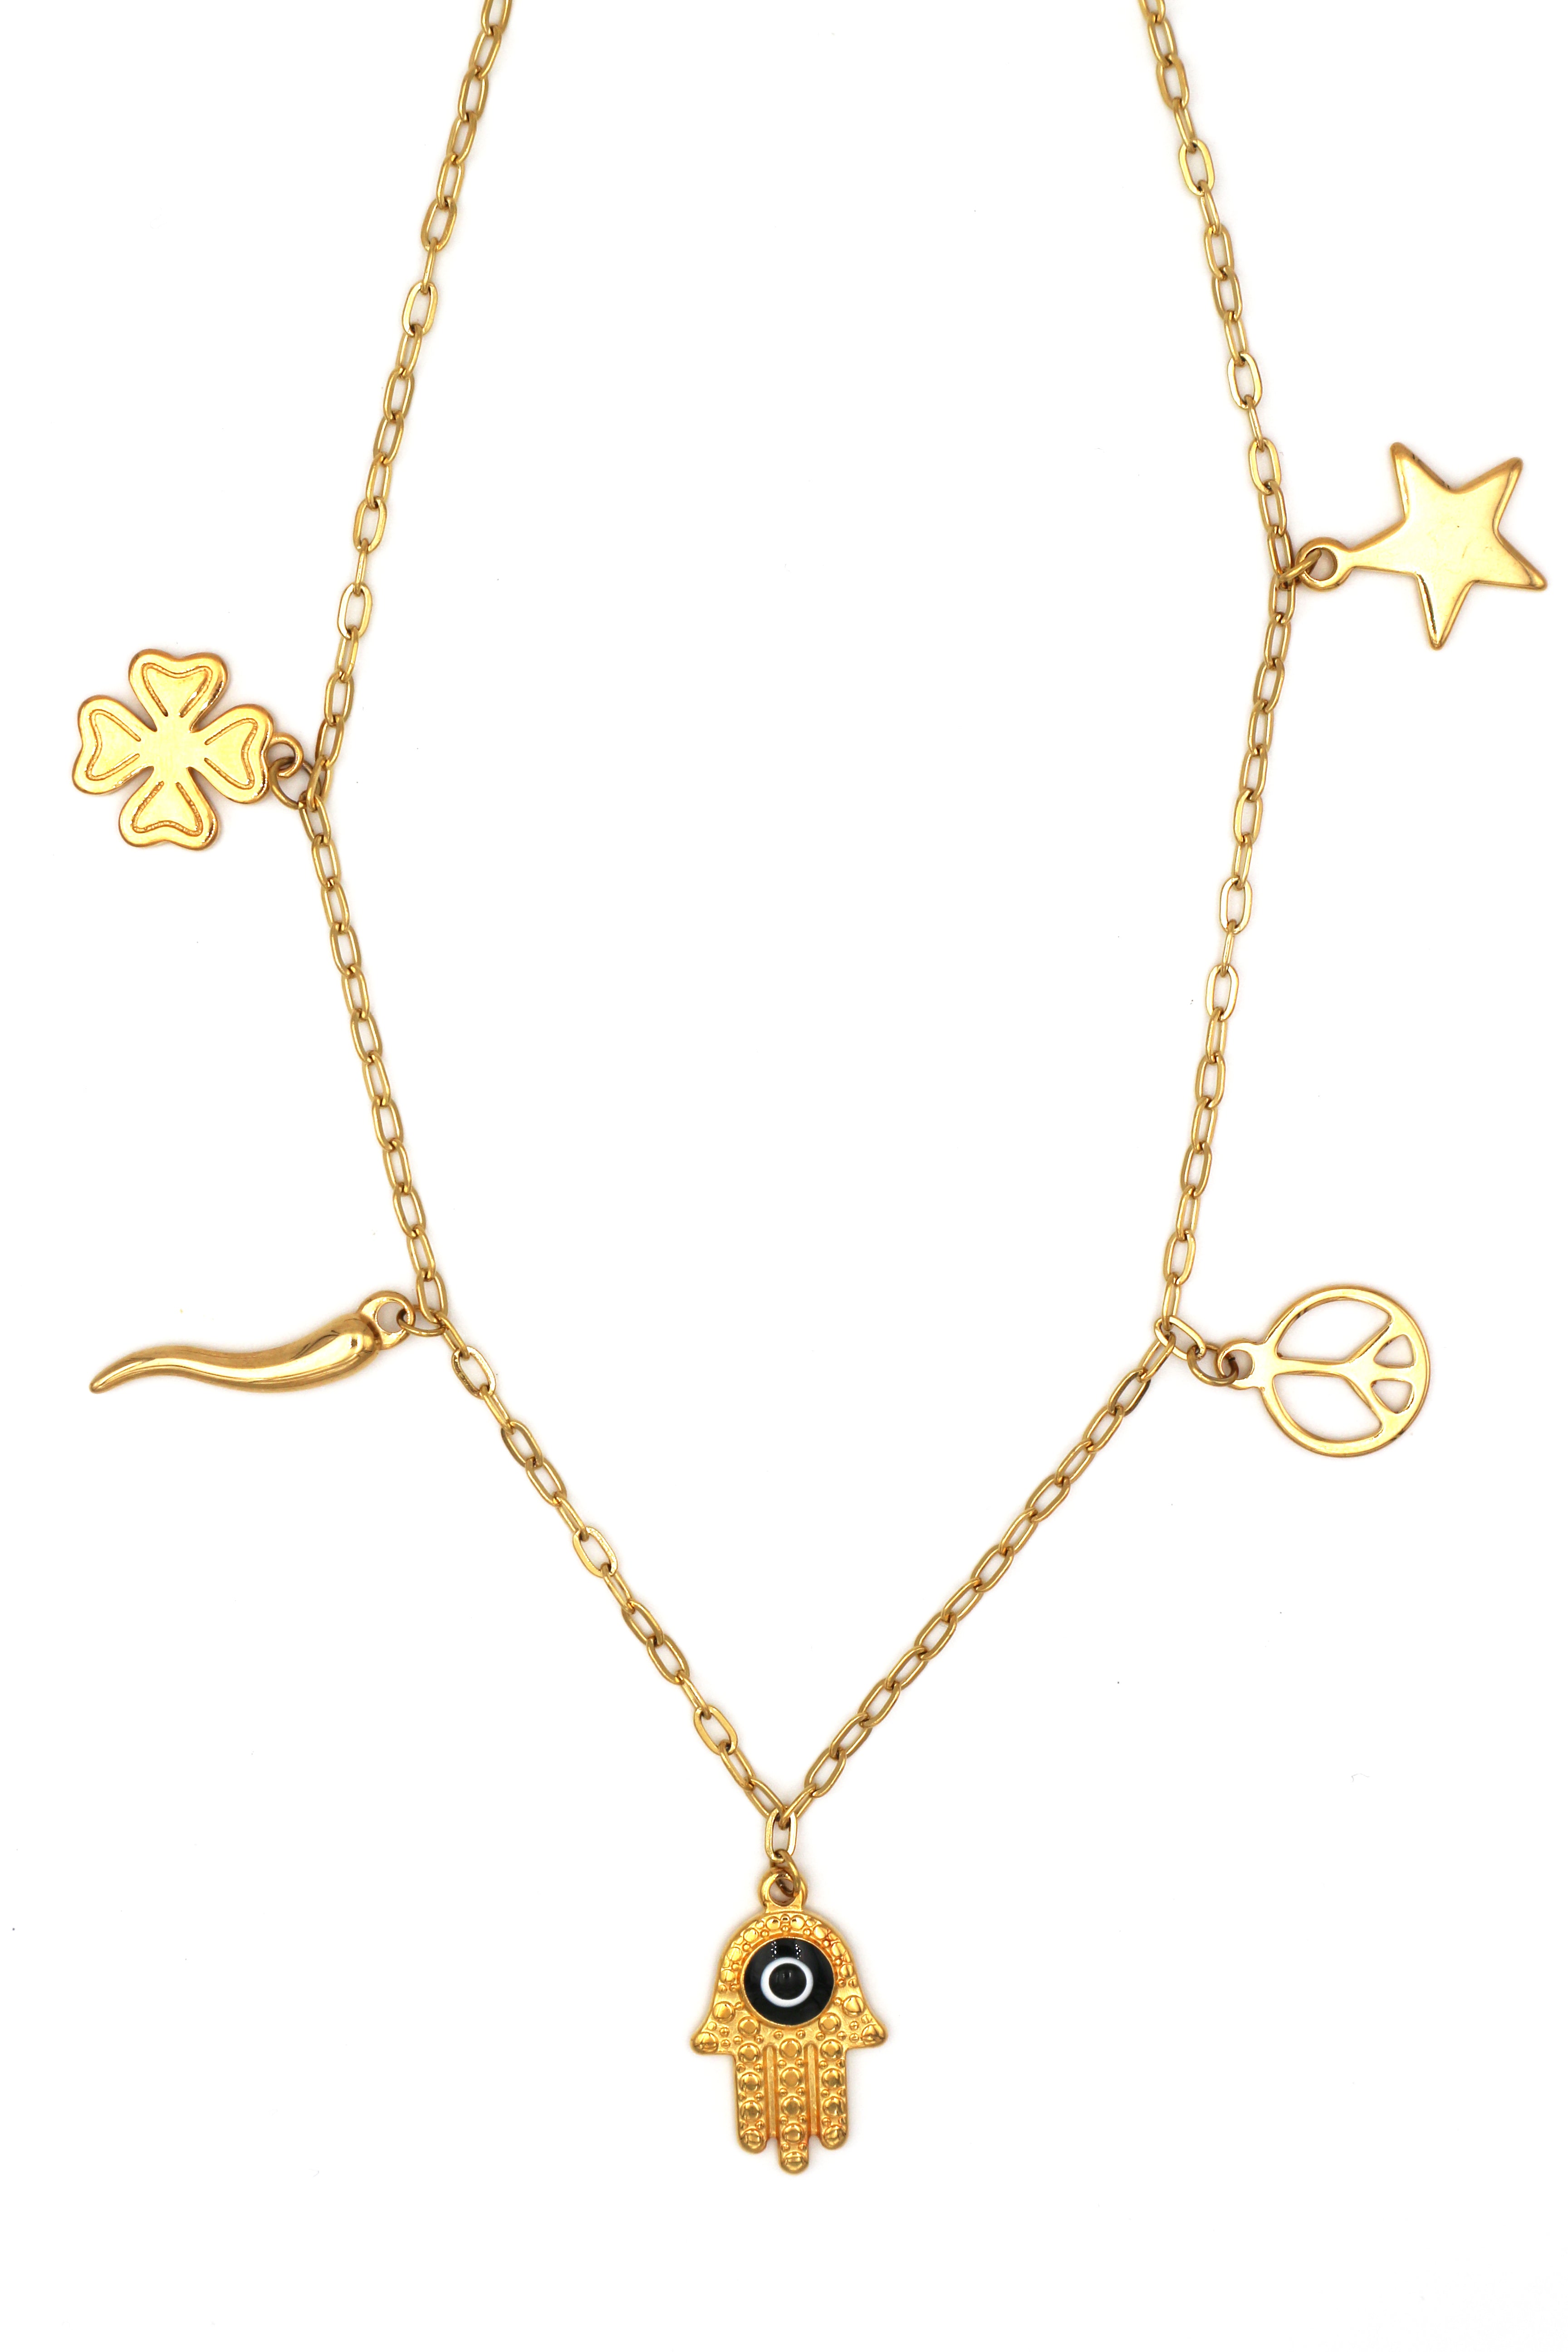 LUCE // The Lucky charms necklace